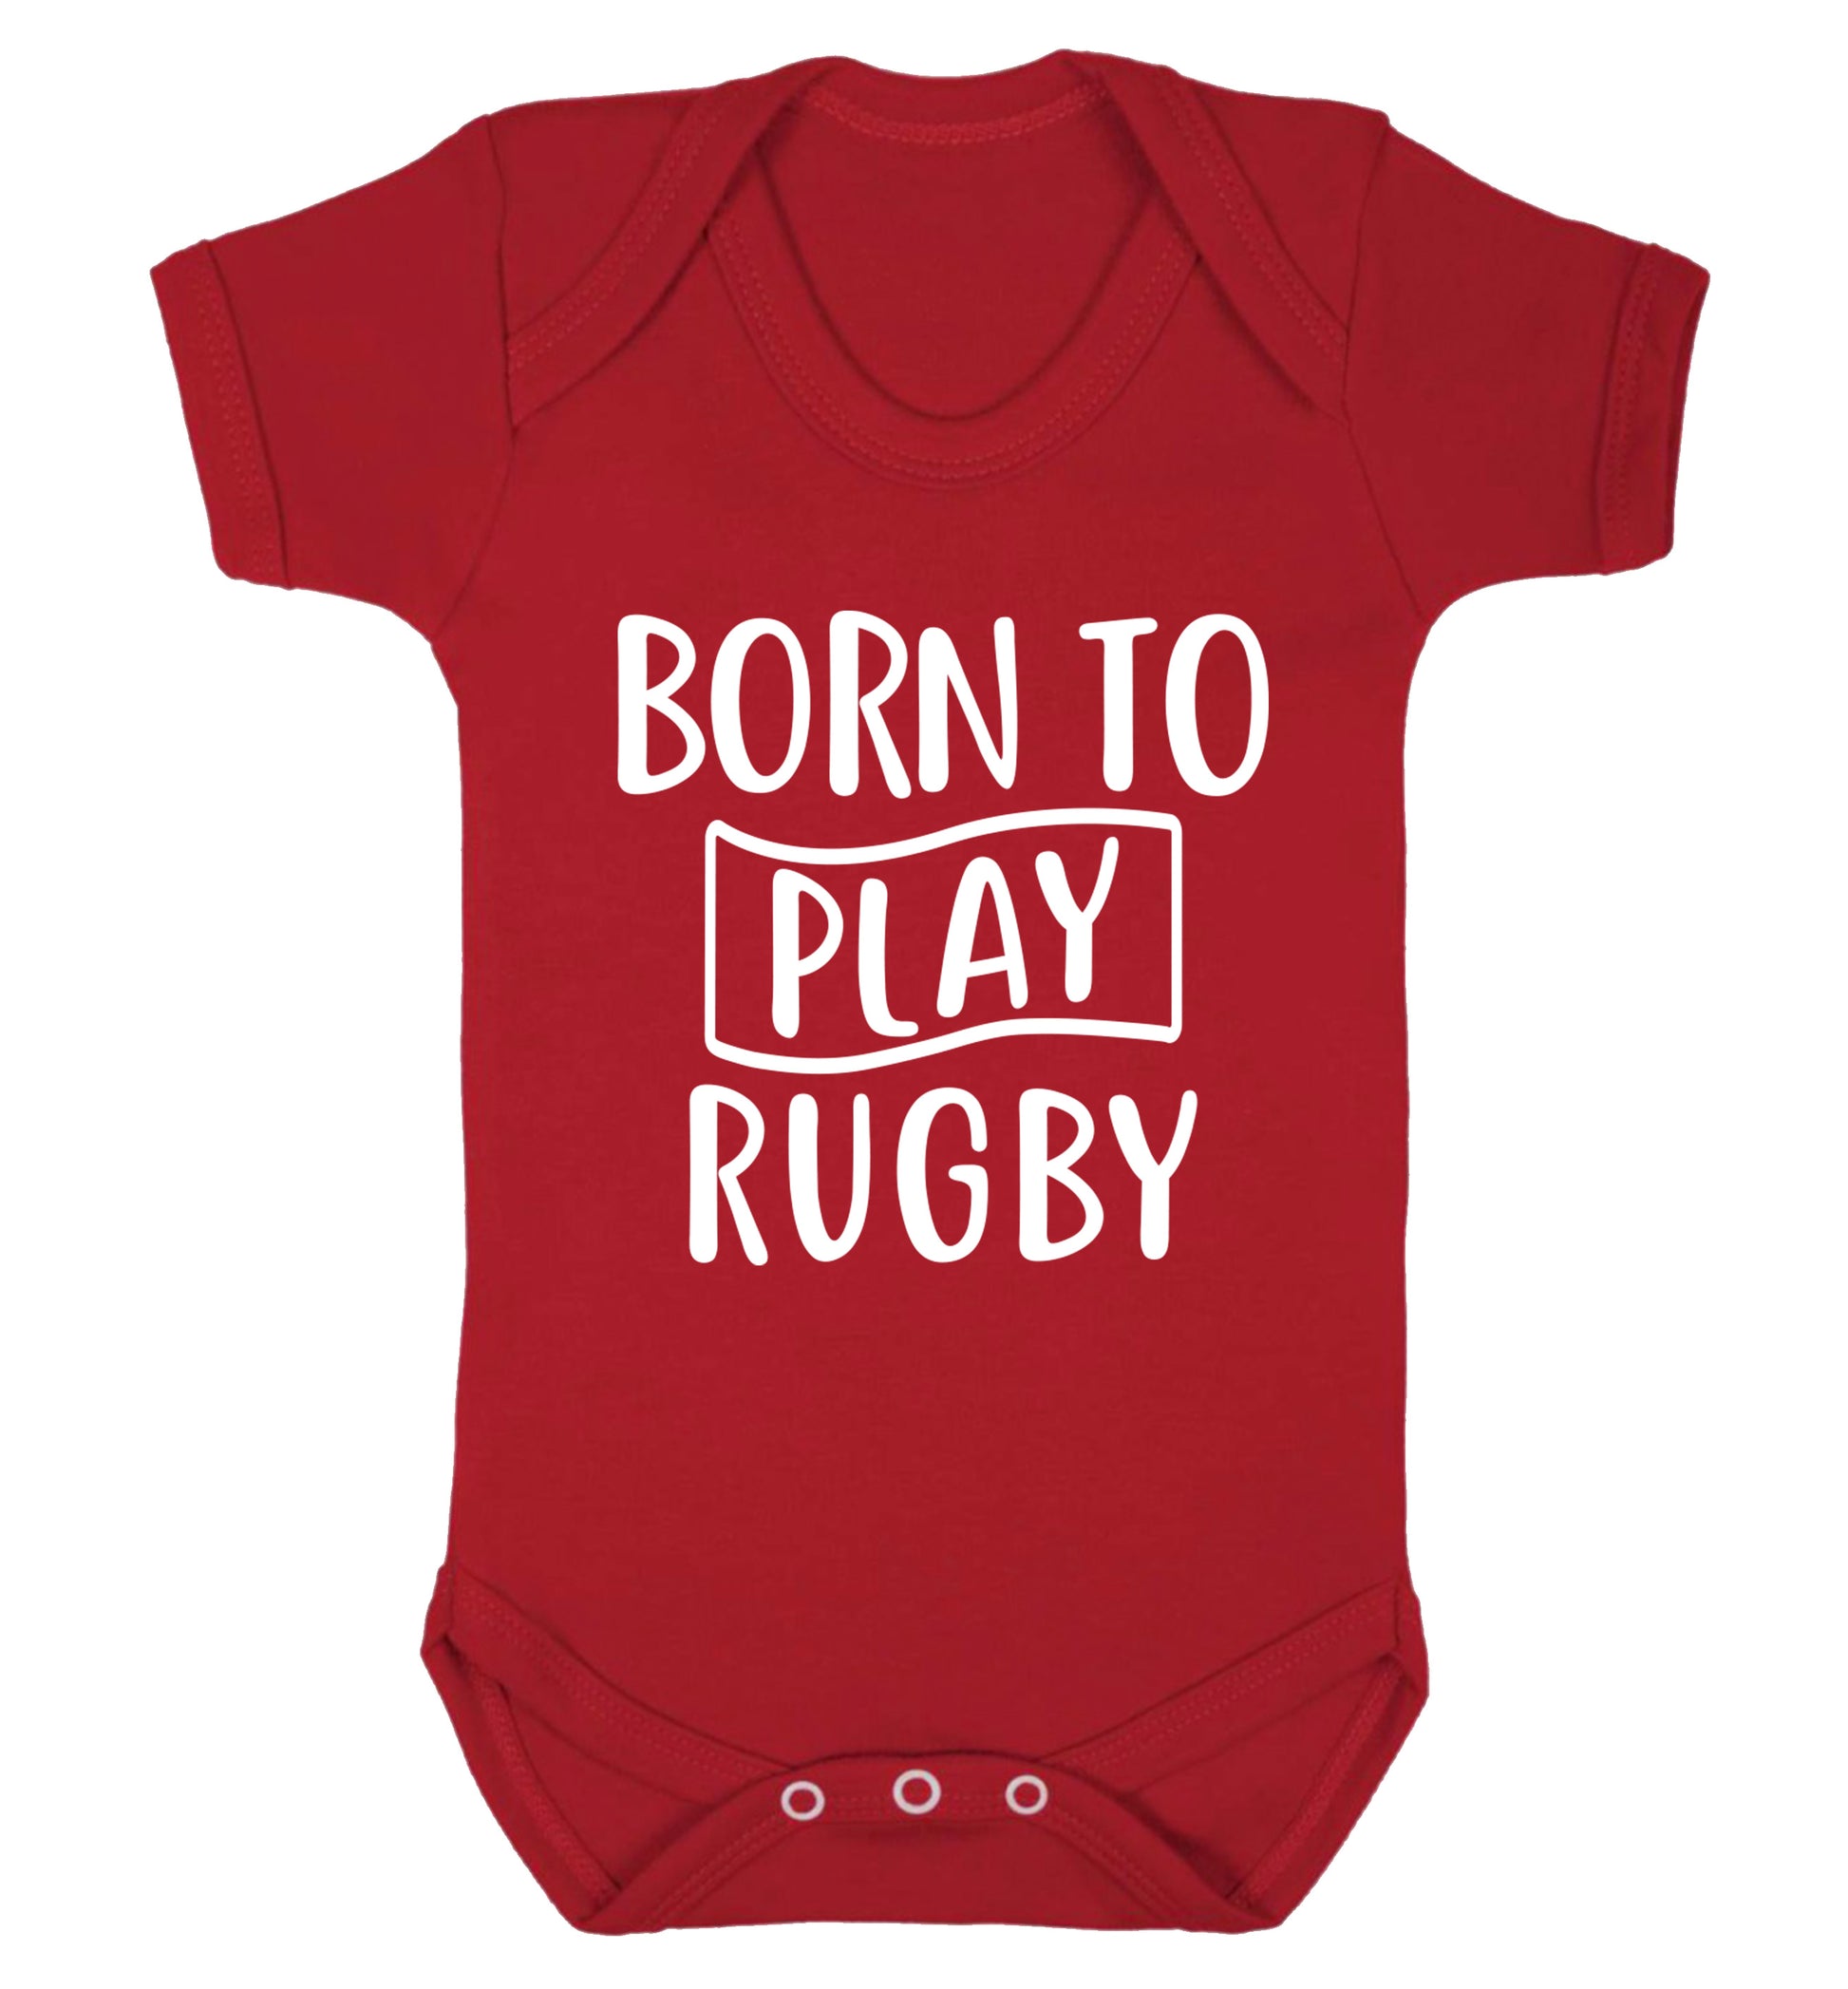 Born to play rugby Baby Vest red 18-24 months